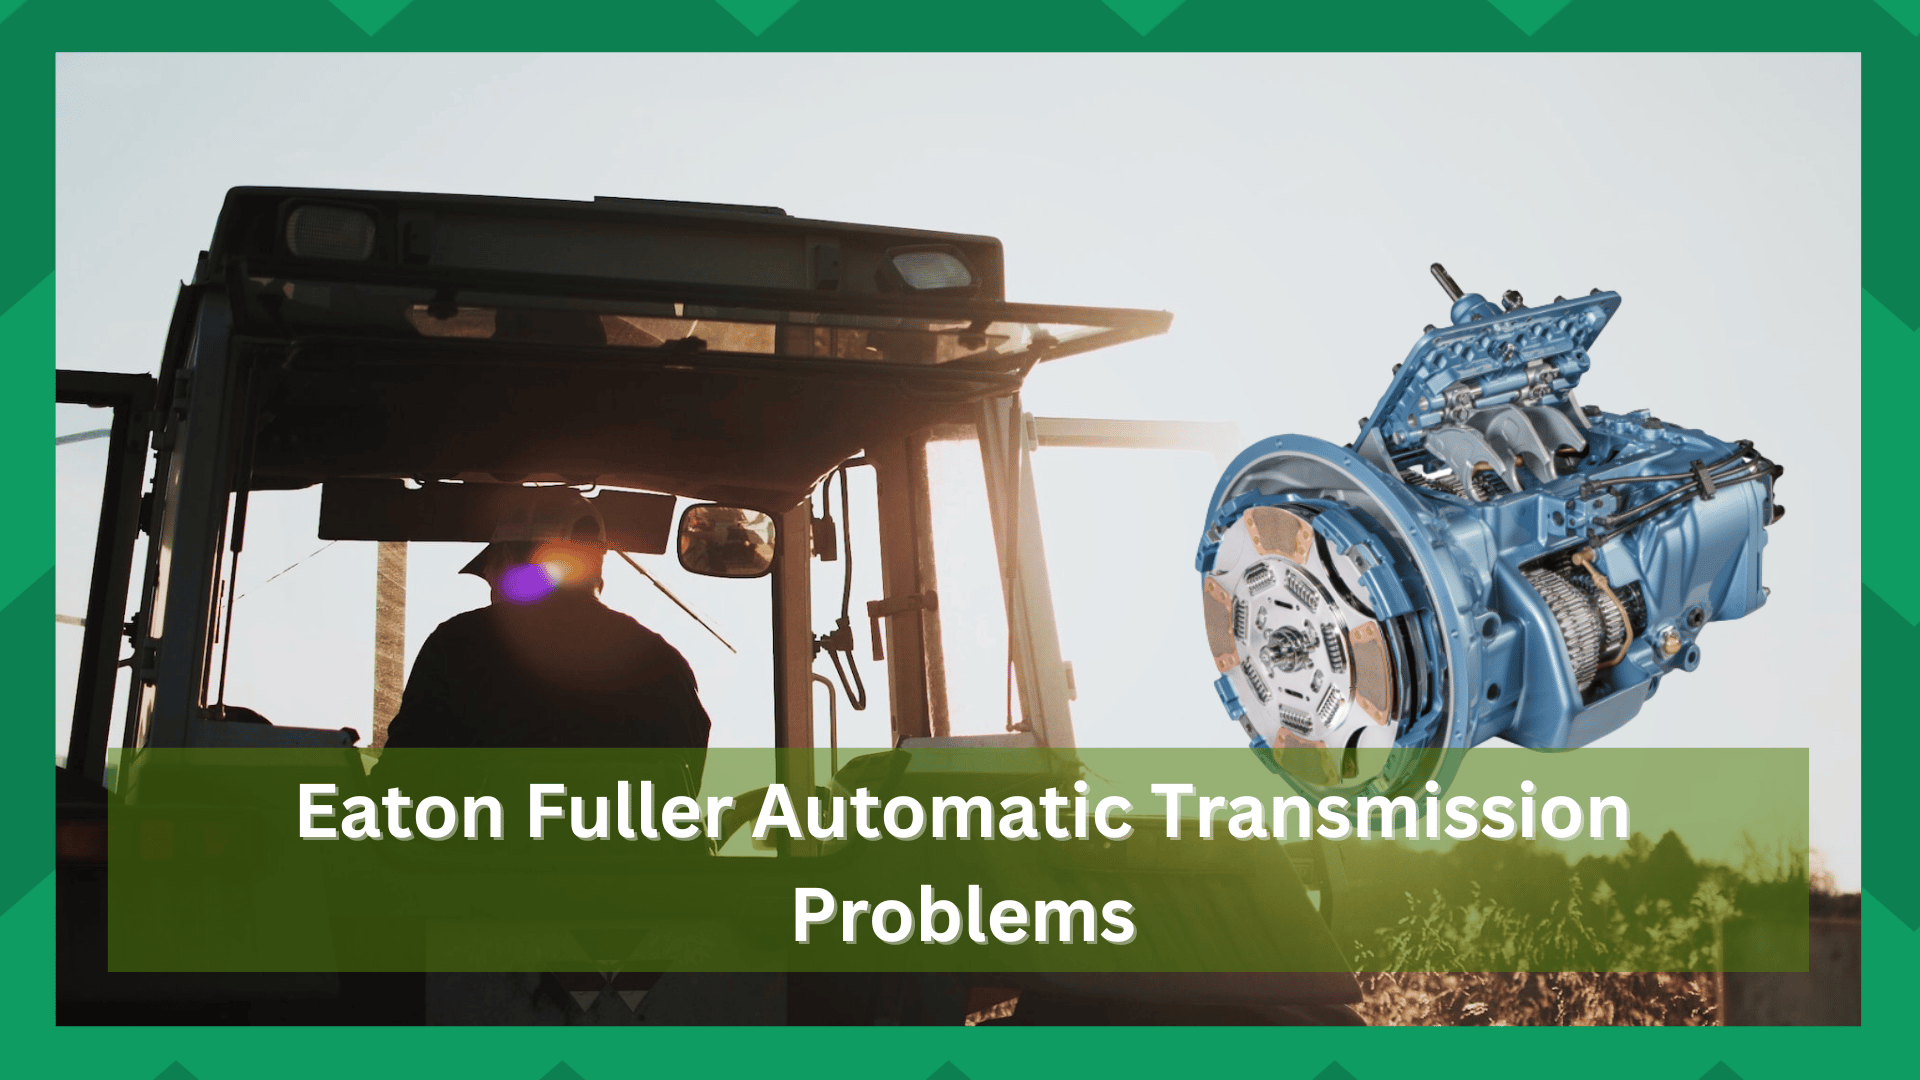 eaton fuller automatic transmission problems